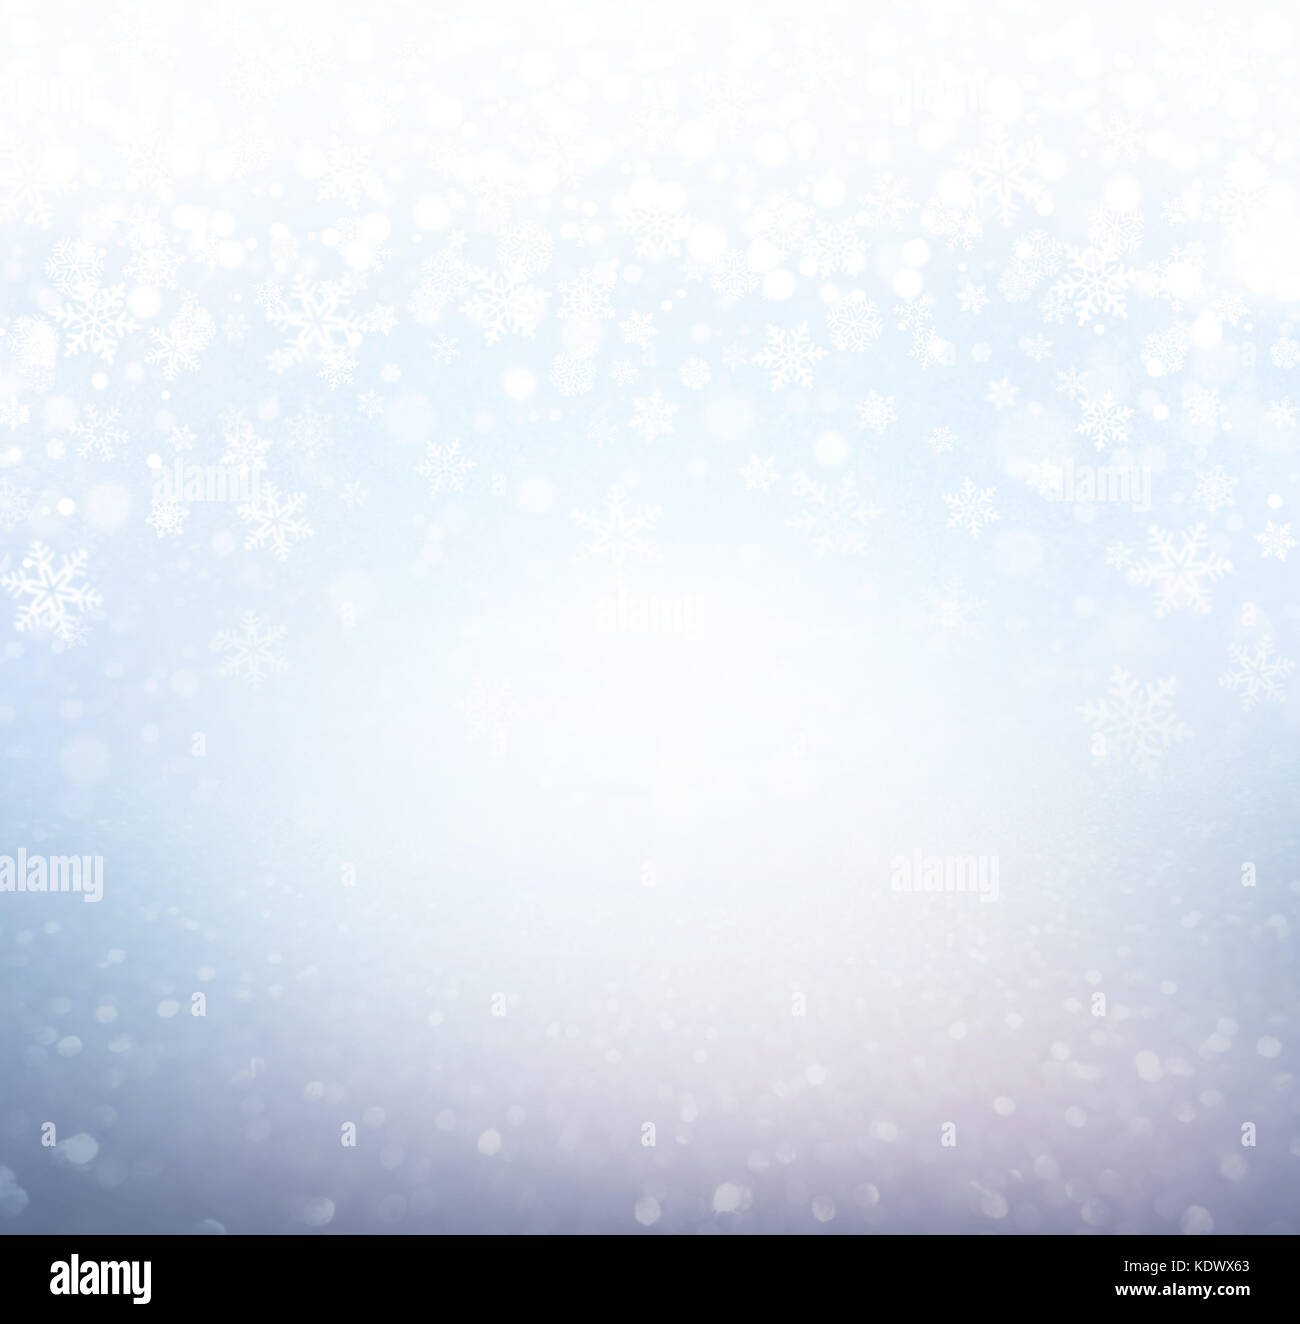 Snowflakes and snowfall on a icy blue background - Winter material Stock Photo